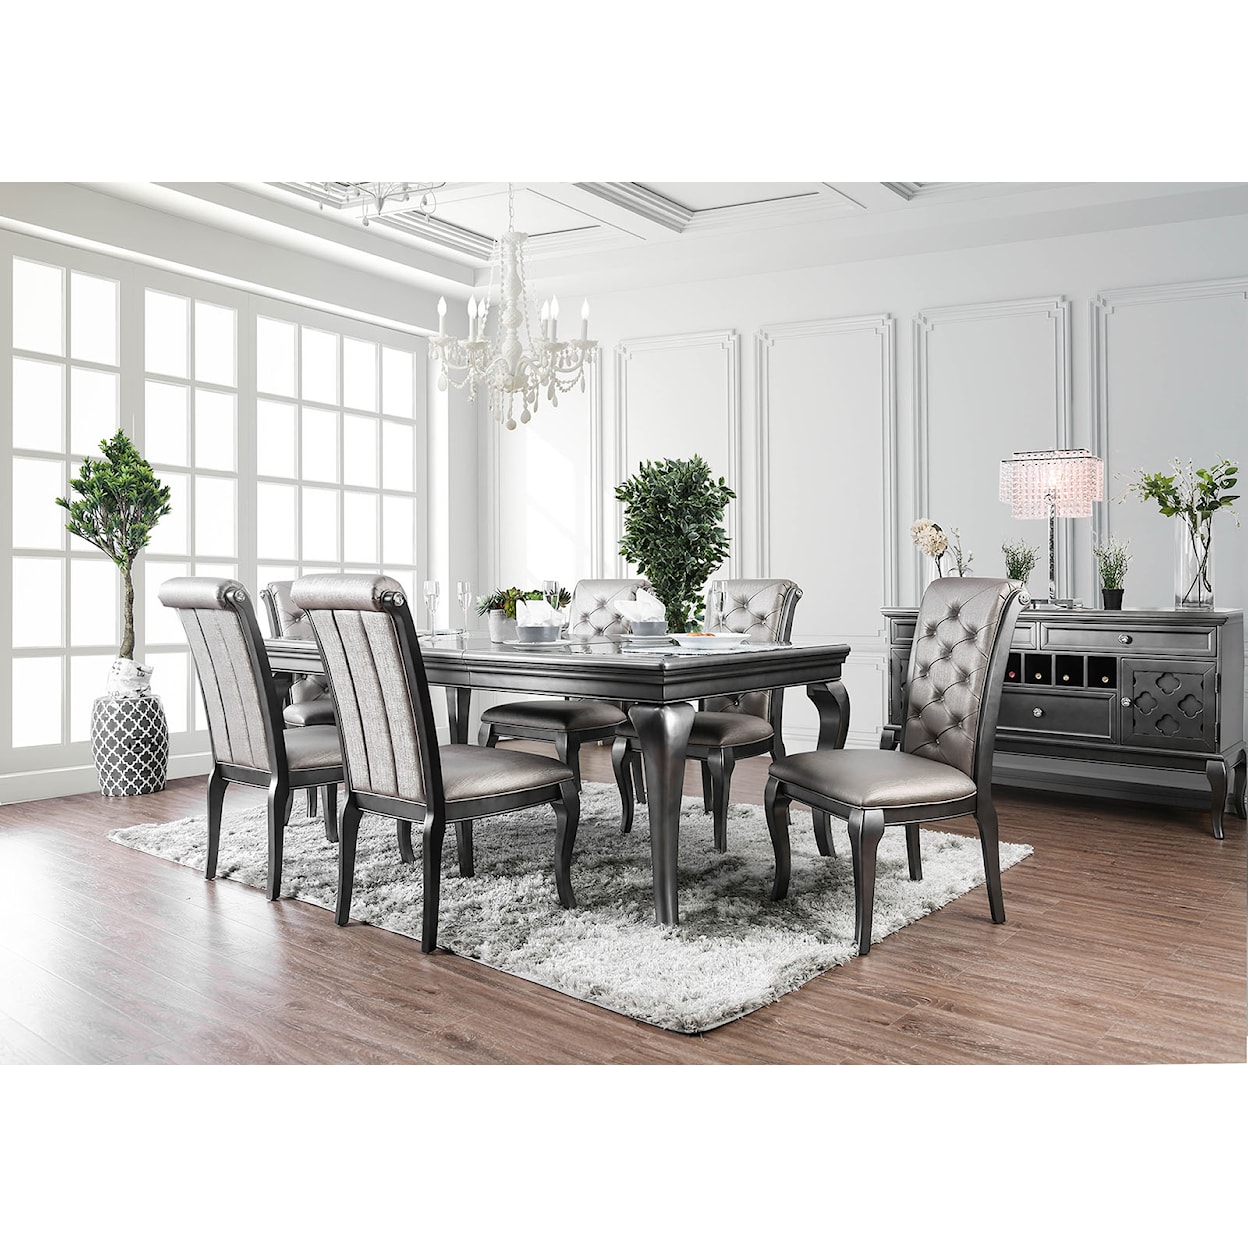 Furniture of America Amina 7-Piece Dining Table Set